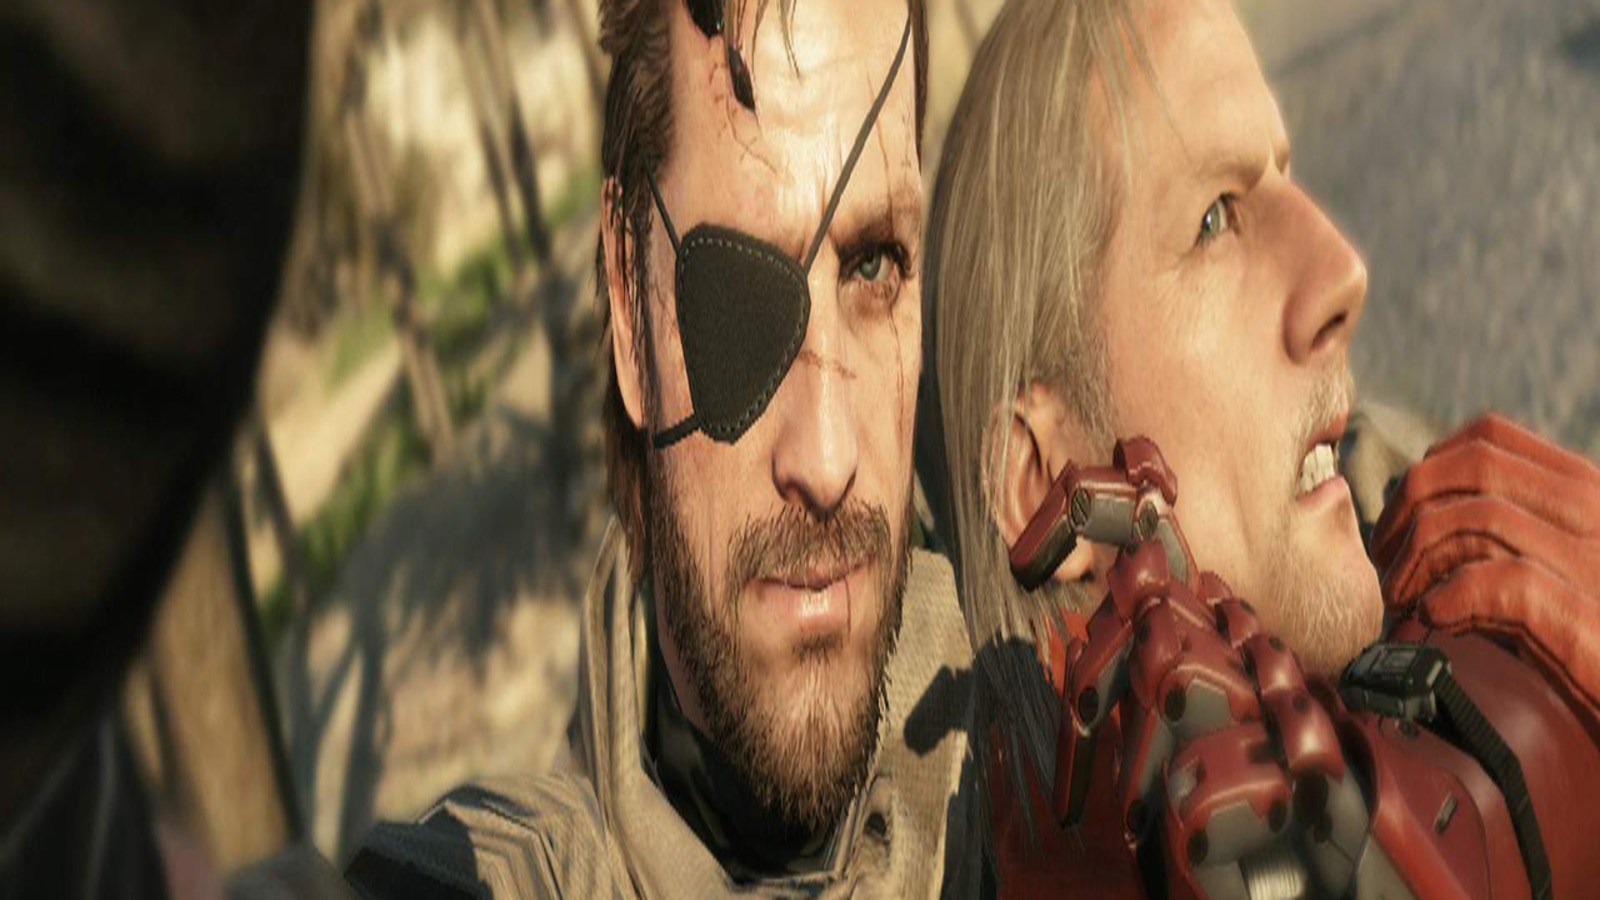 Retailer reminds us that Metal Gear Solid 5 is, in fact, a Hideo